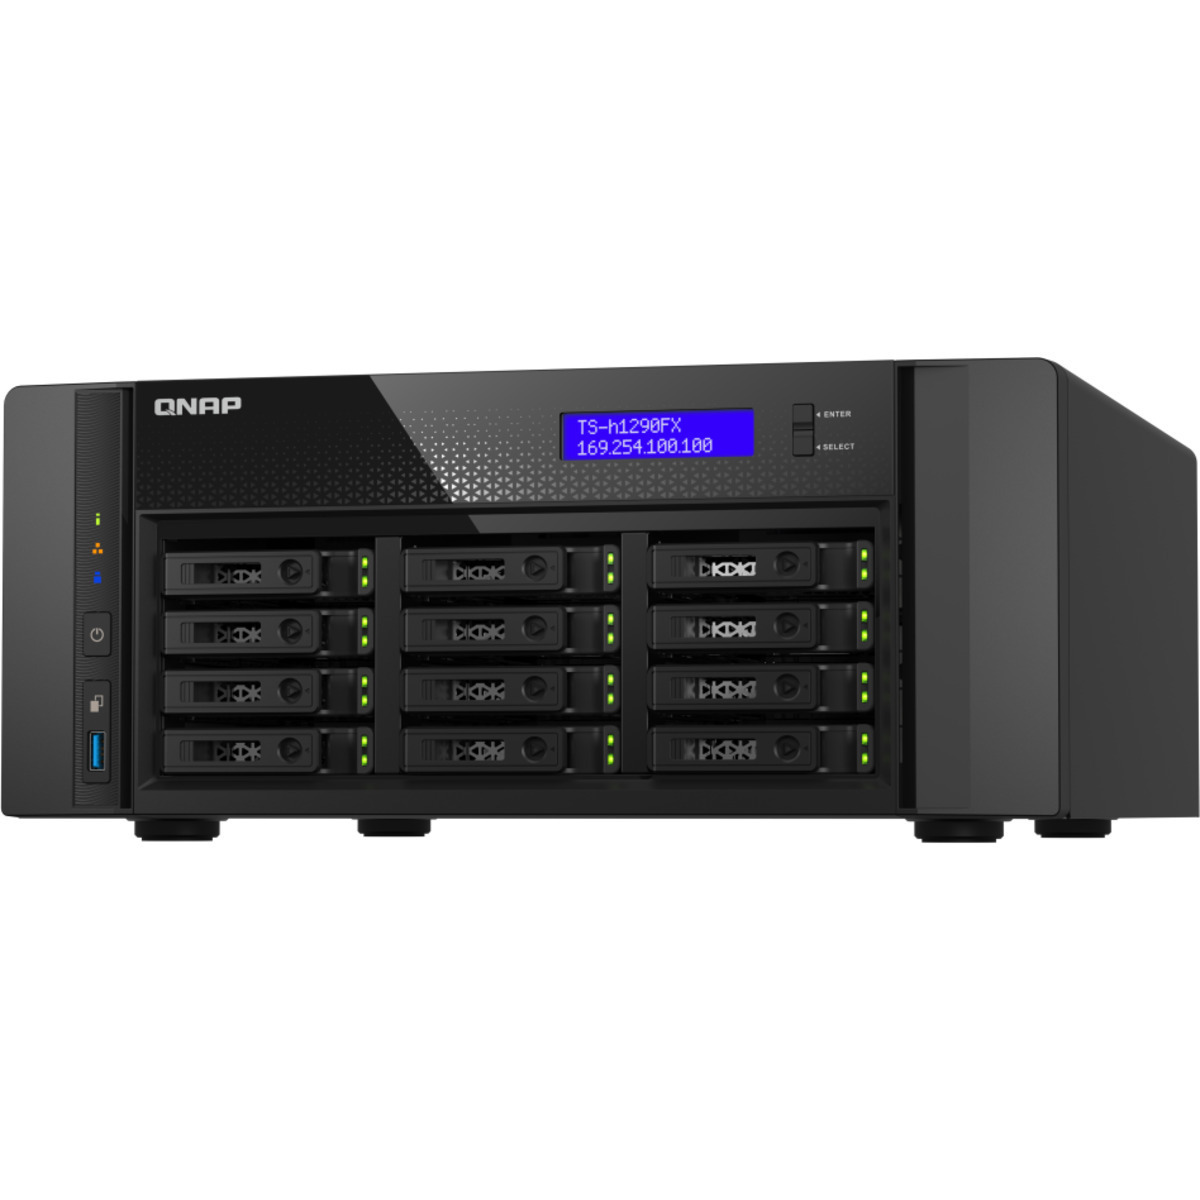 QNAP TS-h1290FX QuTS 7232P hero Edition 10tb 12-Bay Desktop Large Business / Enterprise NAS - Network Attached Storage Device 10x1tb Crucial MX500 CT1000MX500SSD1 2.5 560/510MB/s SATA 6Gb/s SSD CONSUMER Class Drives Installed - Burn-In Tested TS-h1290FX QuTS 7232P hero Edition